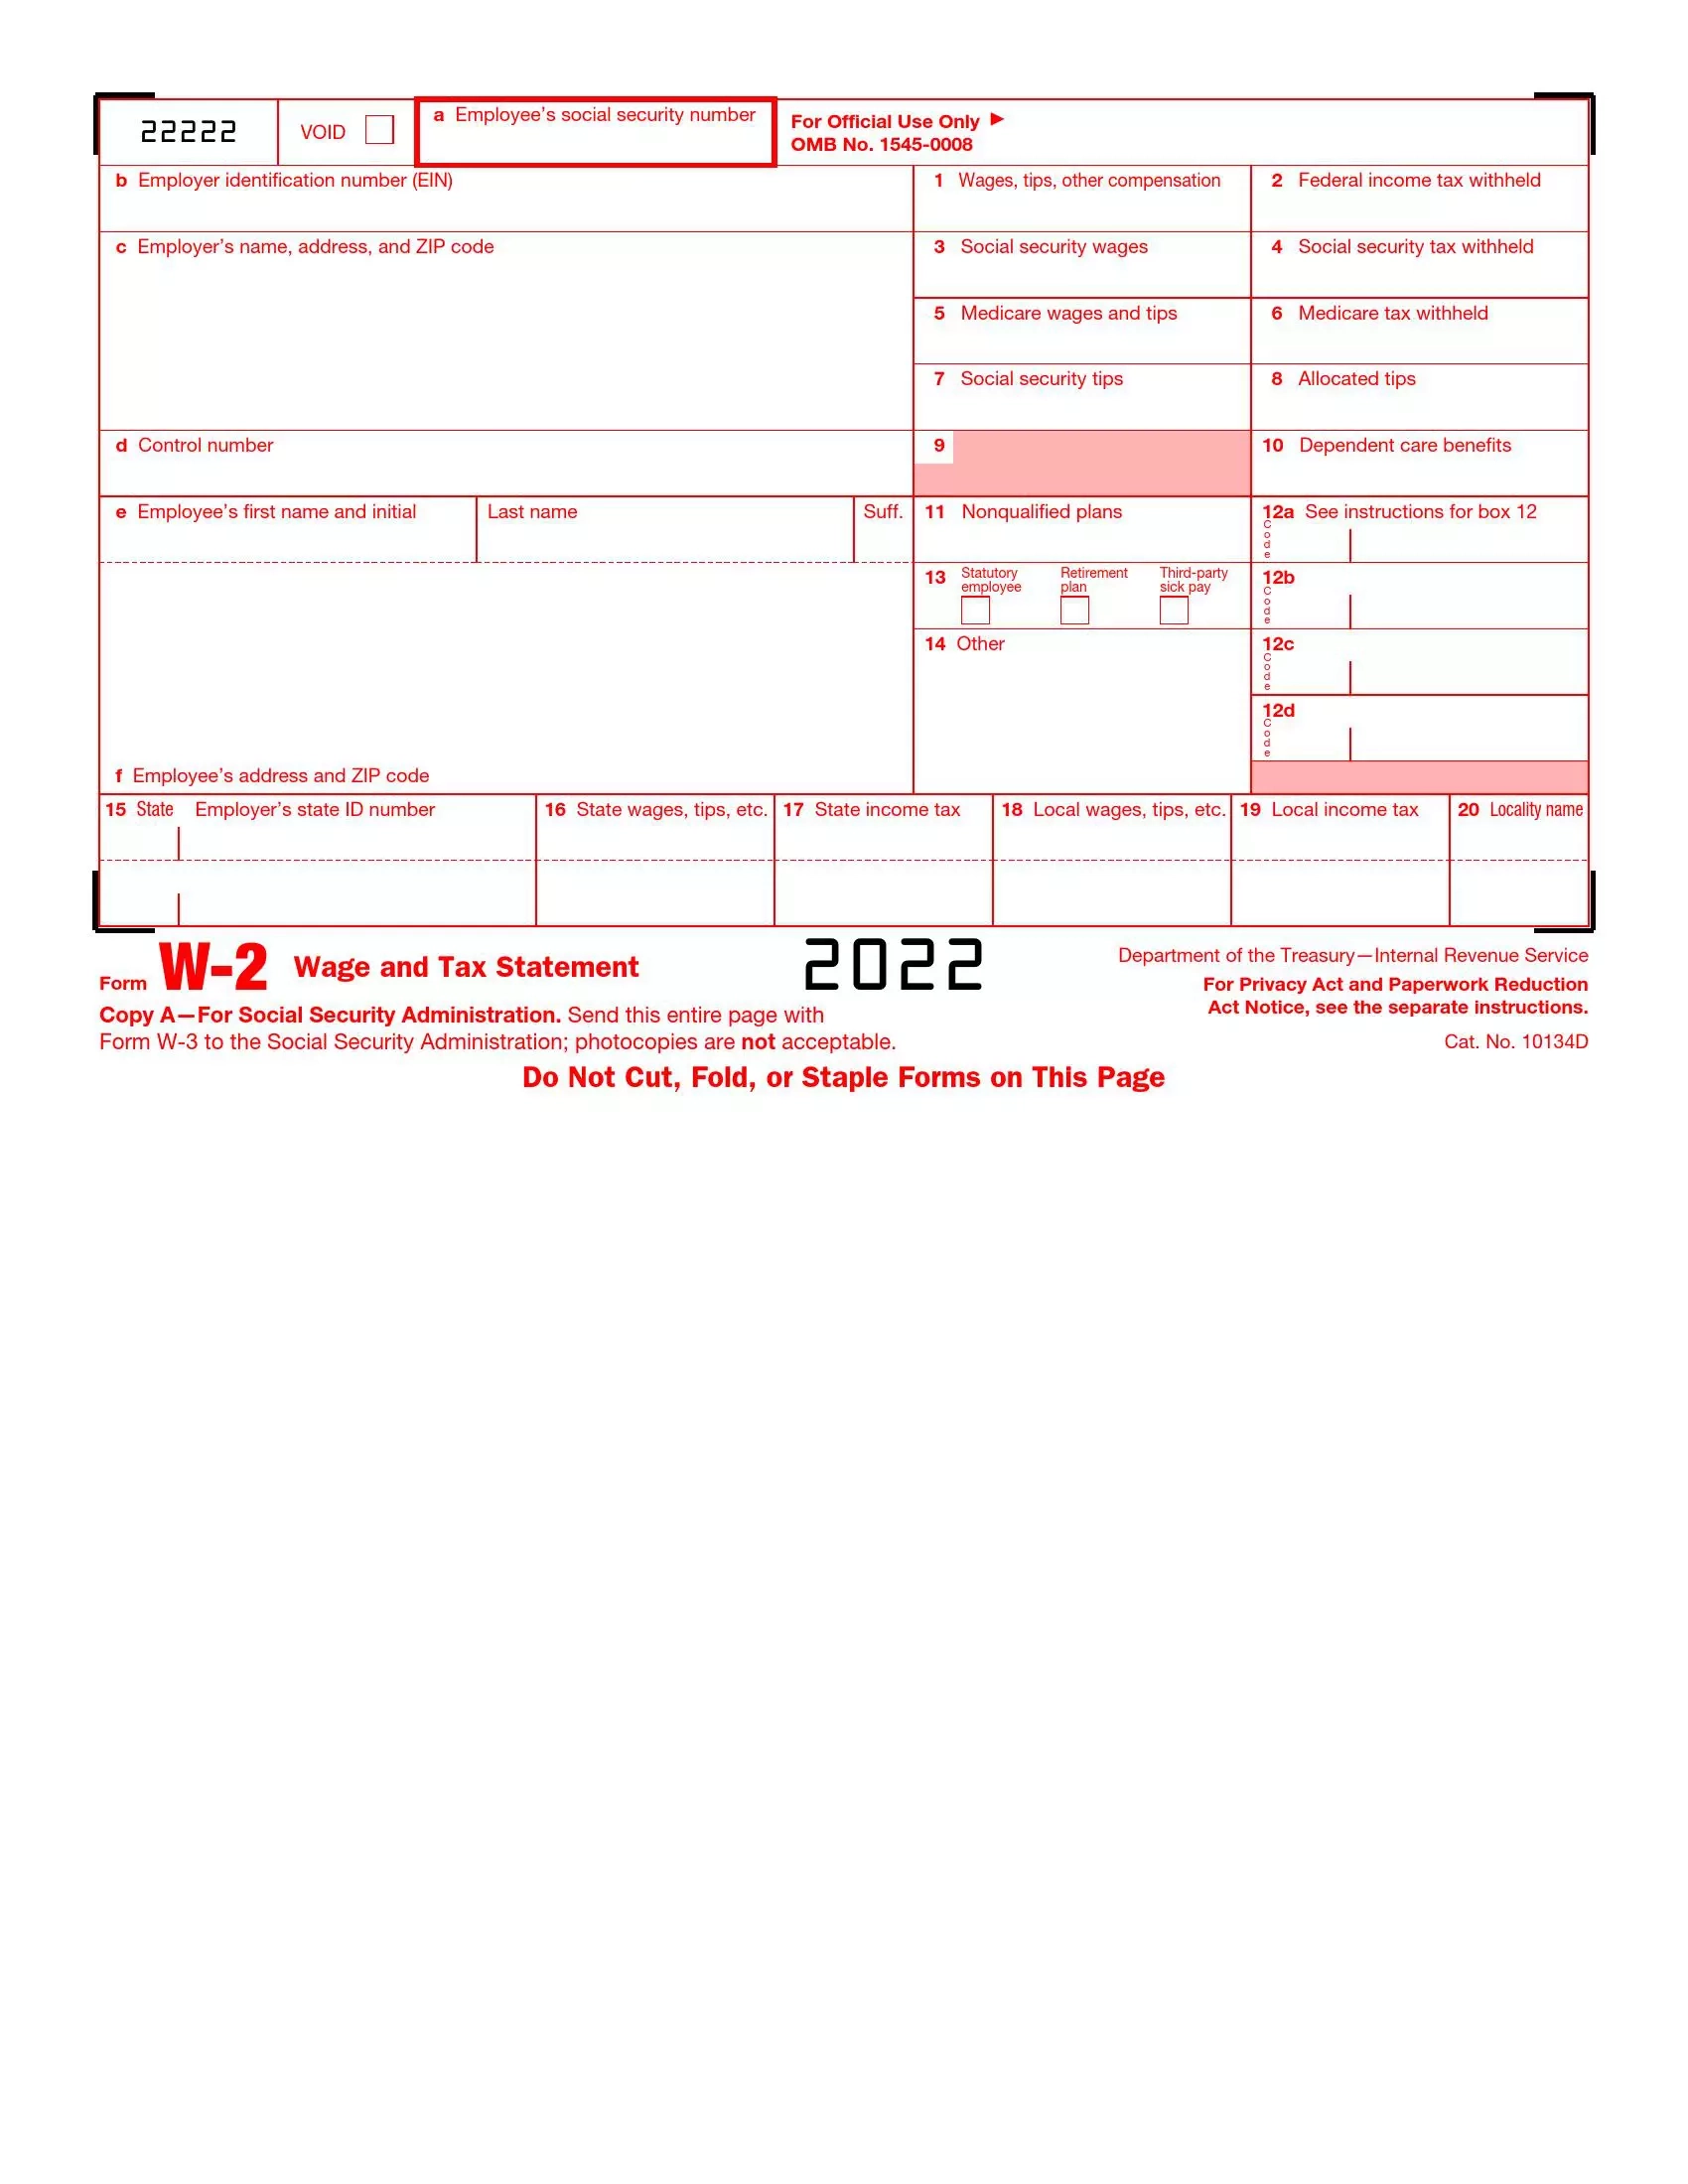 Irs Form W-2 ≡ Fill Out Printable Pdf Forms Online with W2 Form Pdf